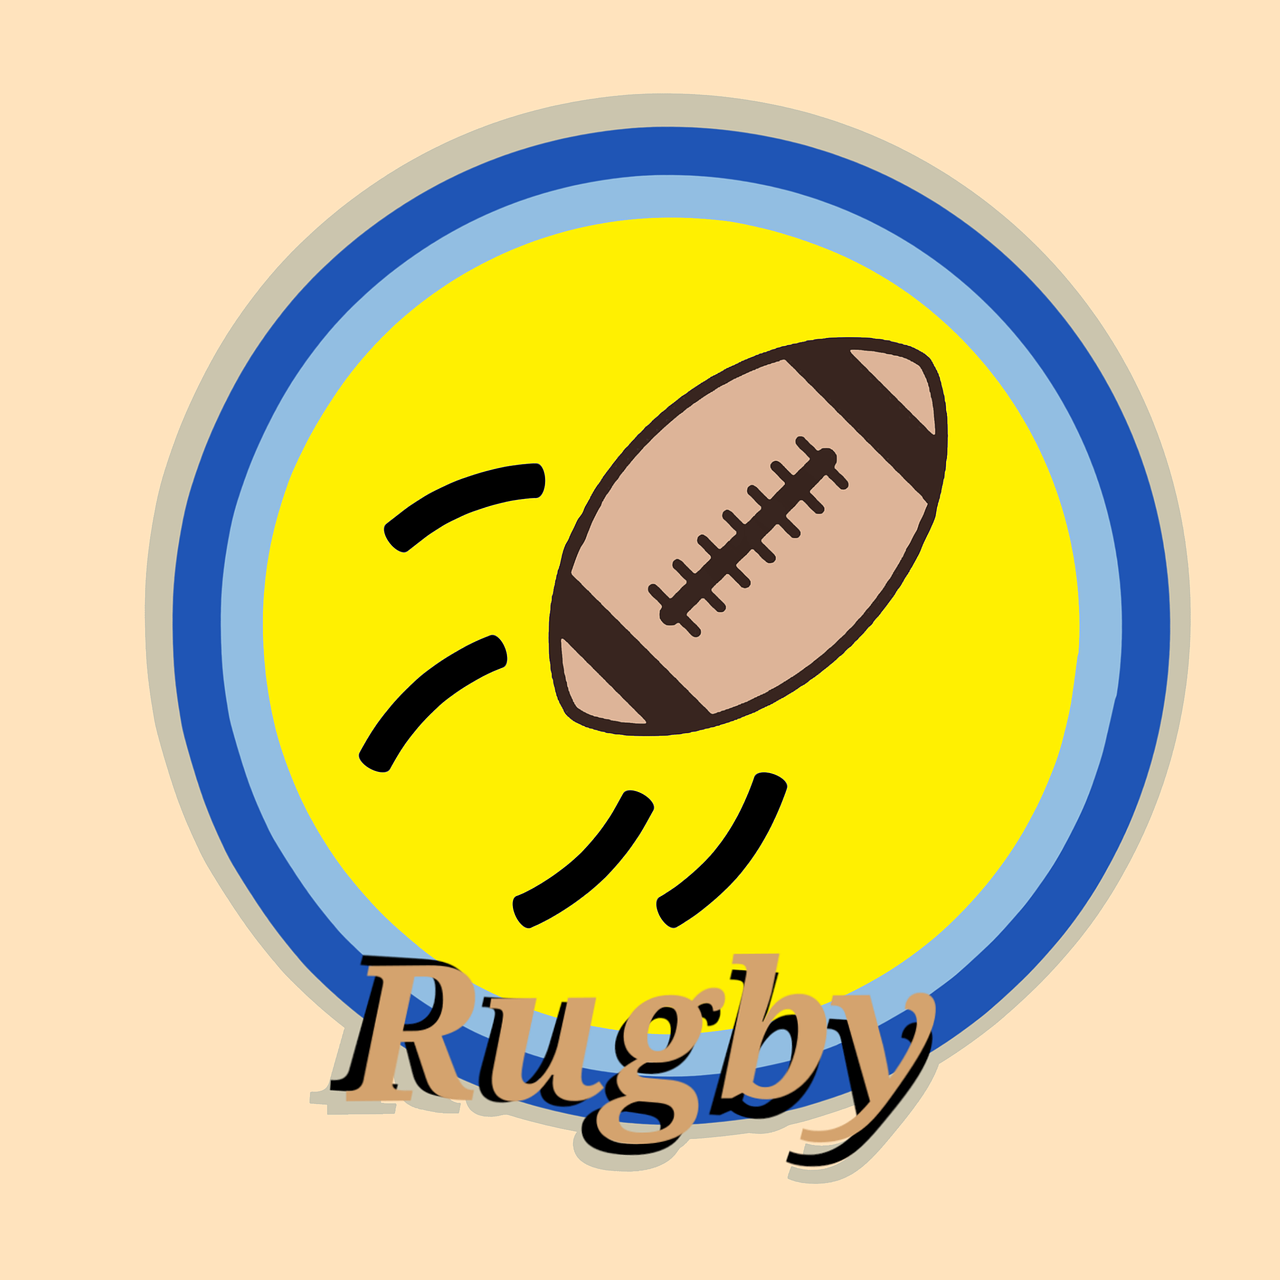 Il rugby a scuola: Tag Rugby